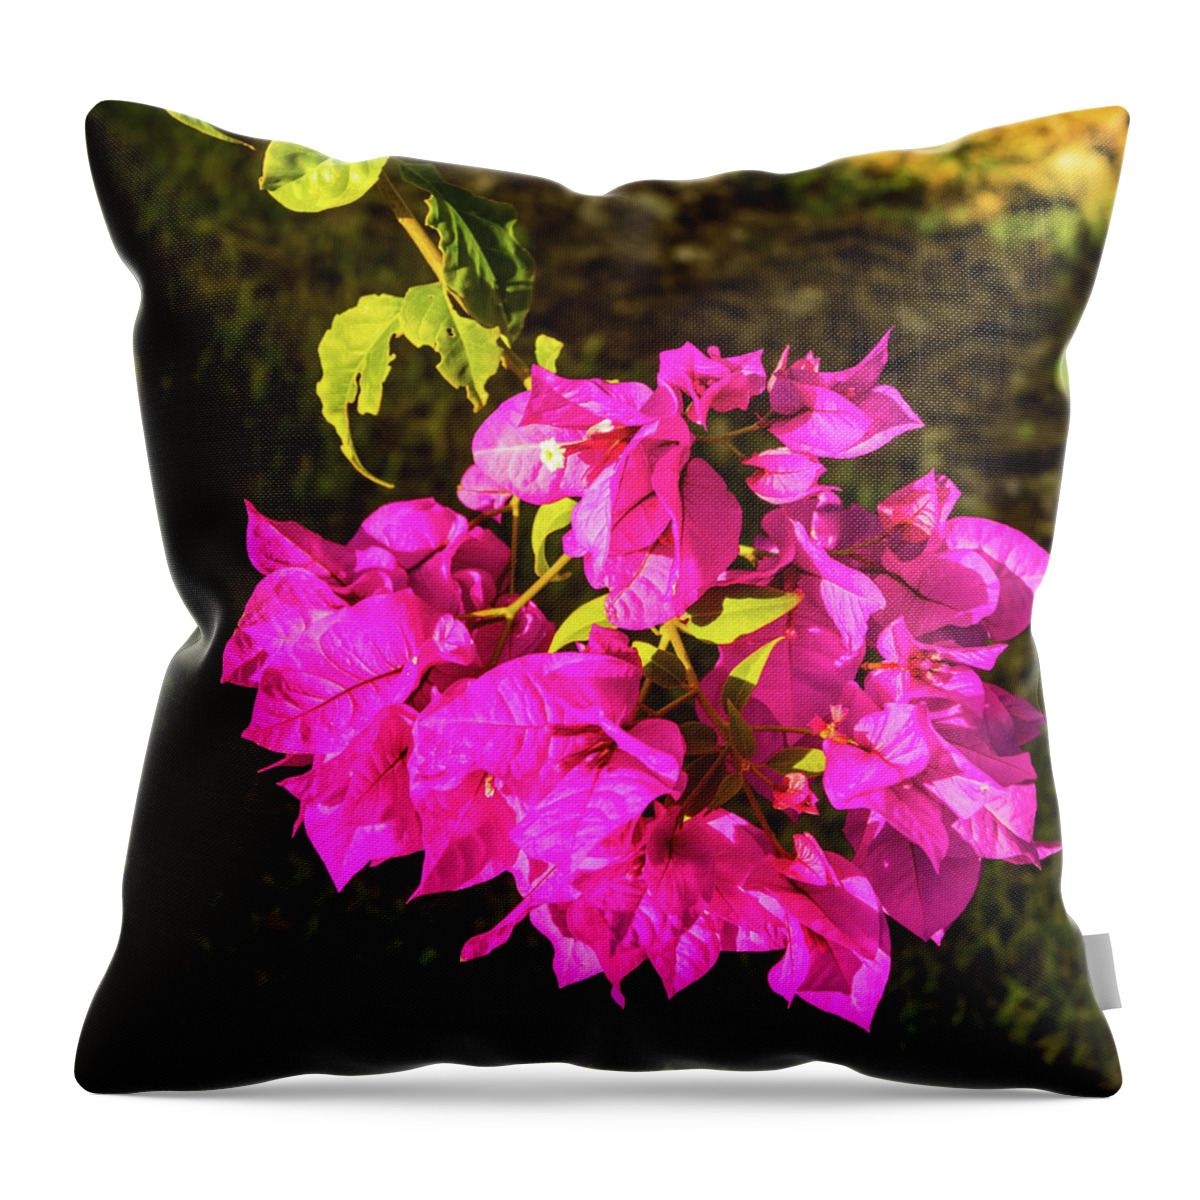 Bougainvillea Throw Pillow featuring the photograph Bougavillea Flower by James Gay